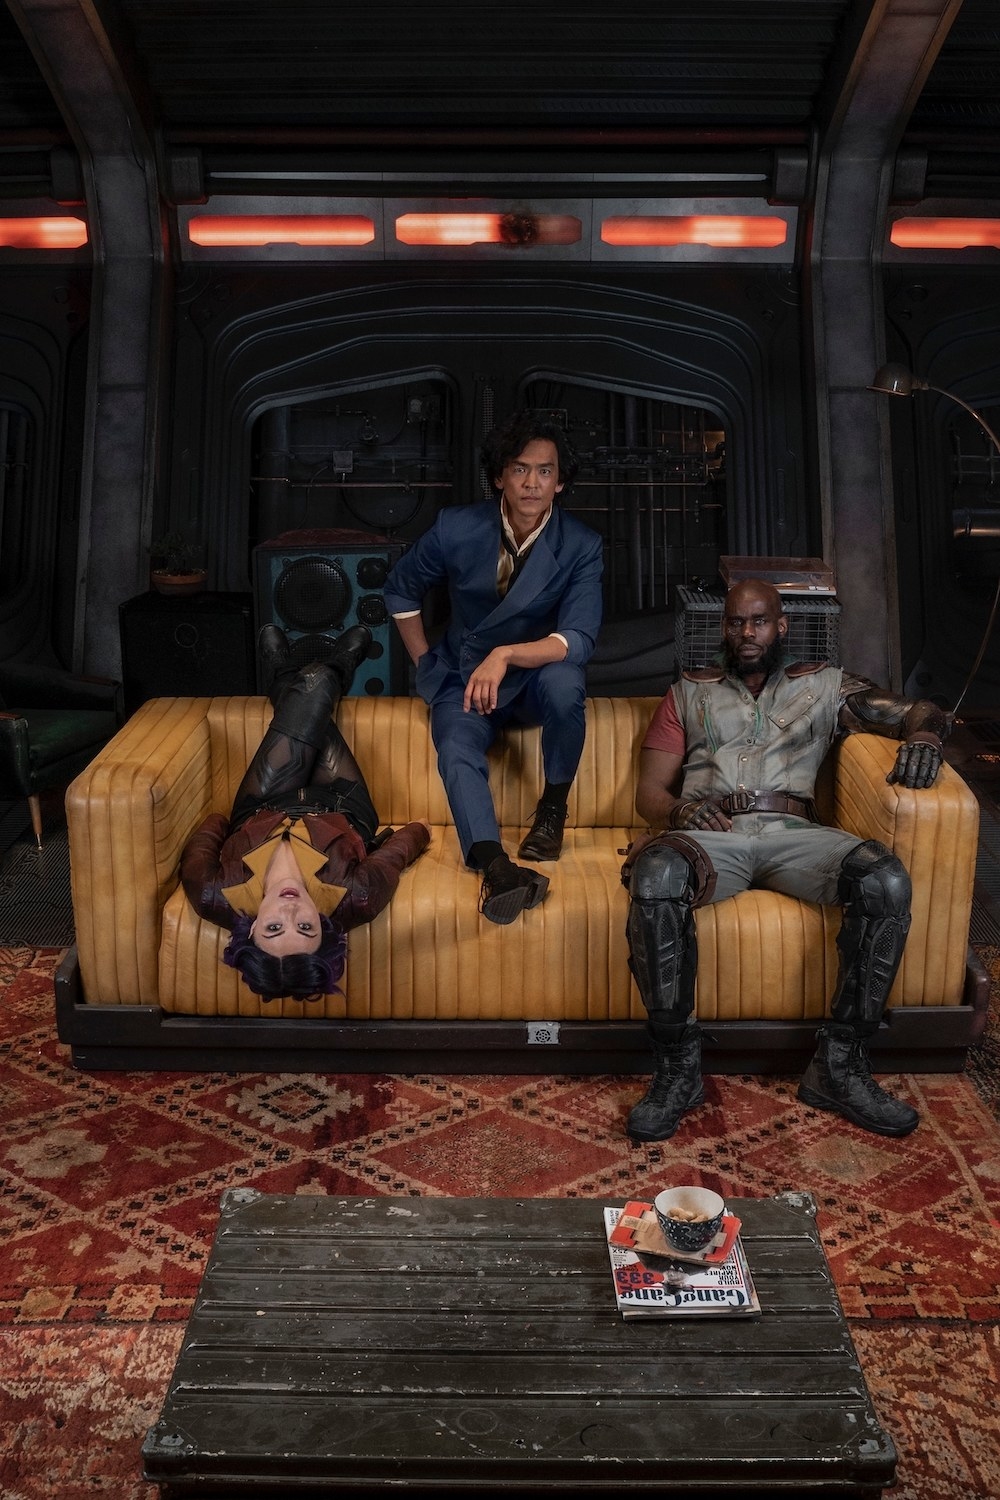 The cast in character lounging on a couch